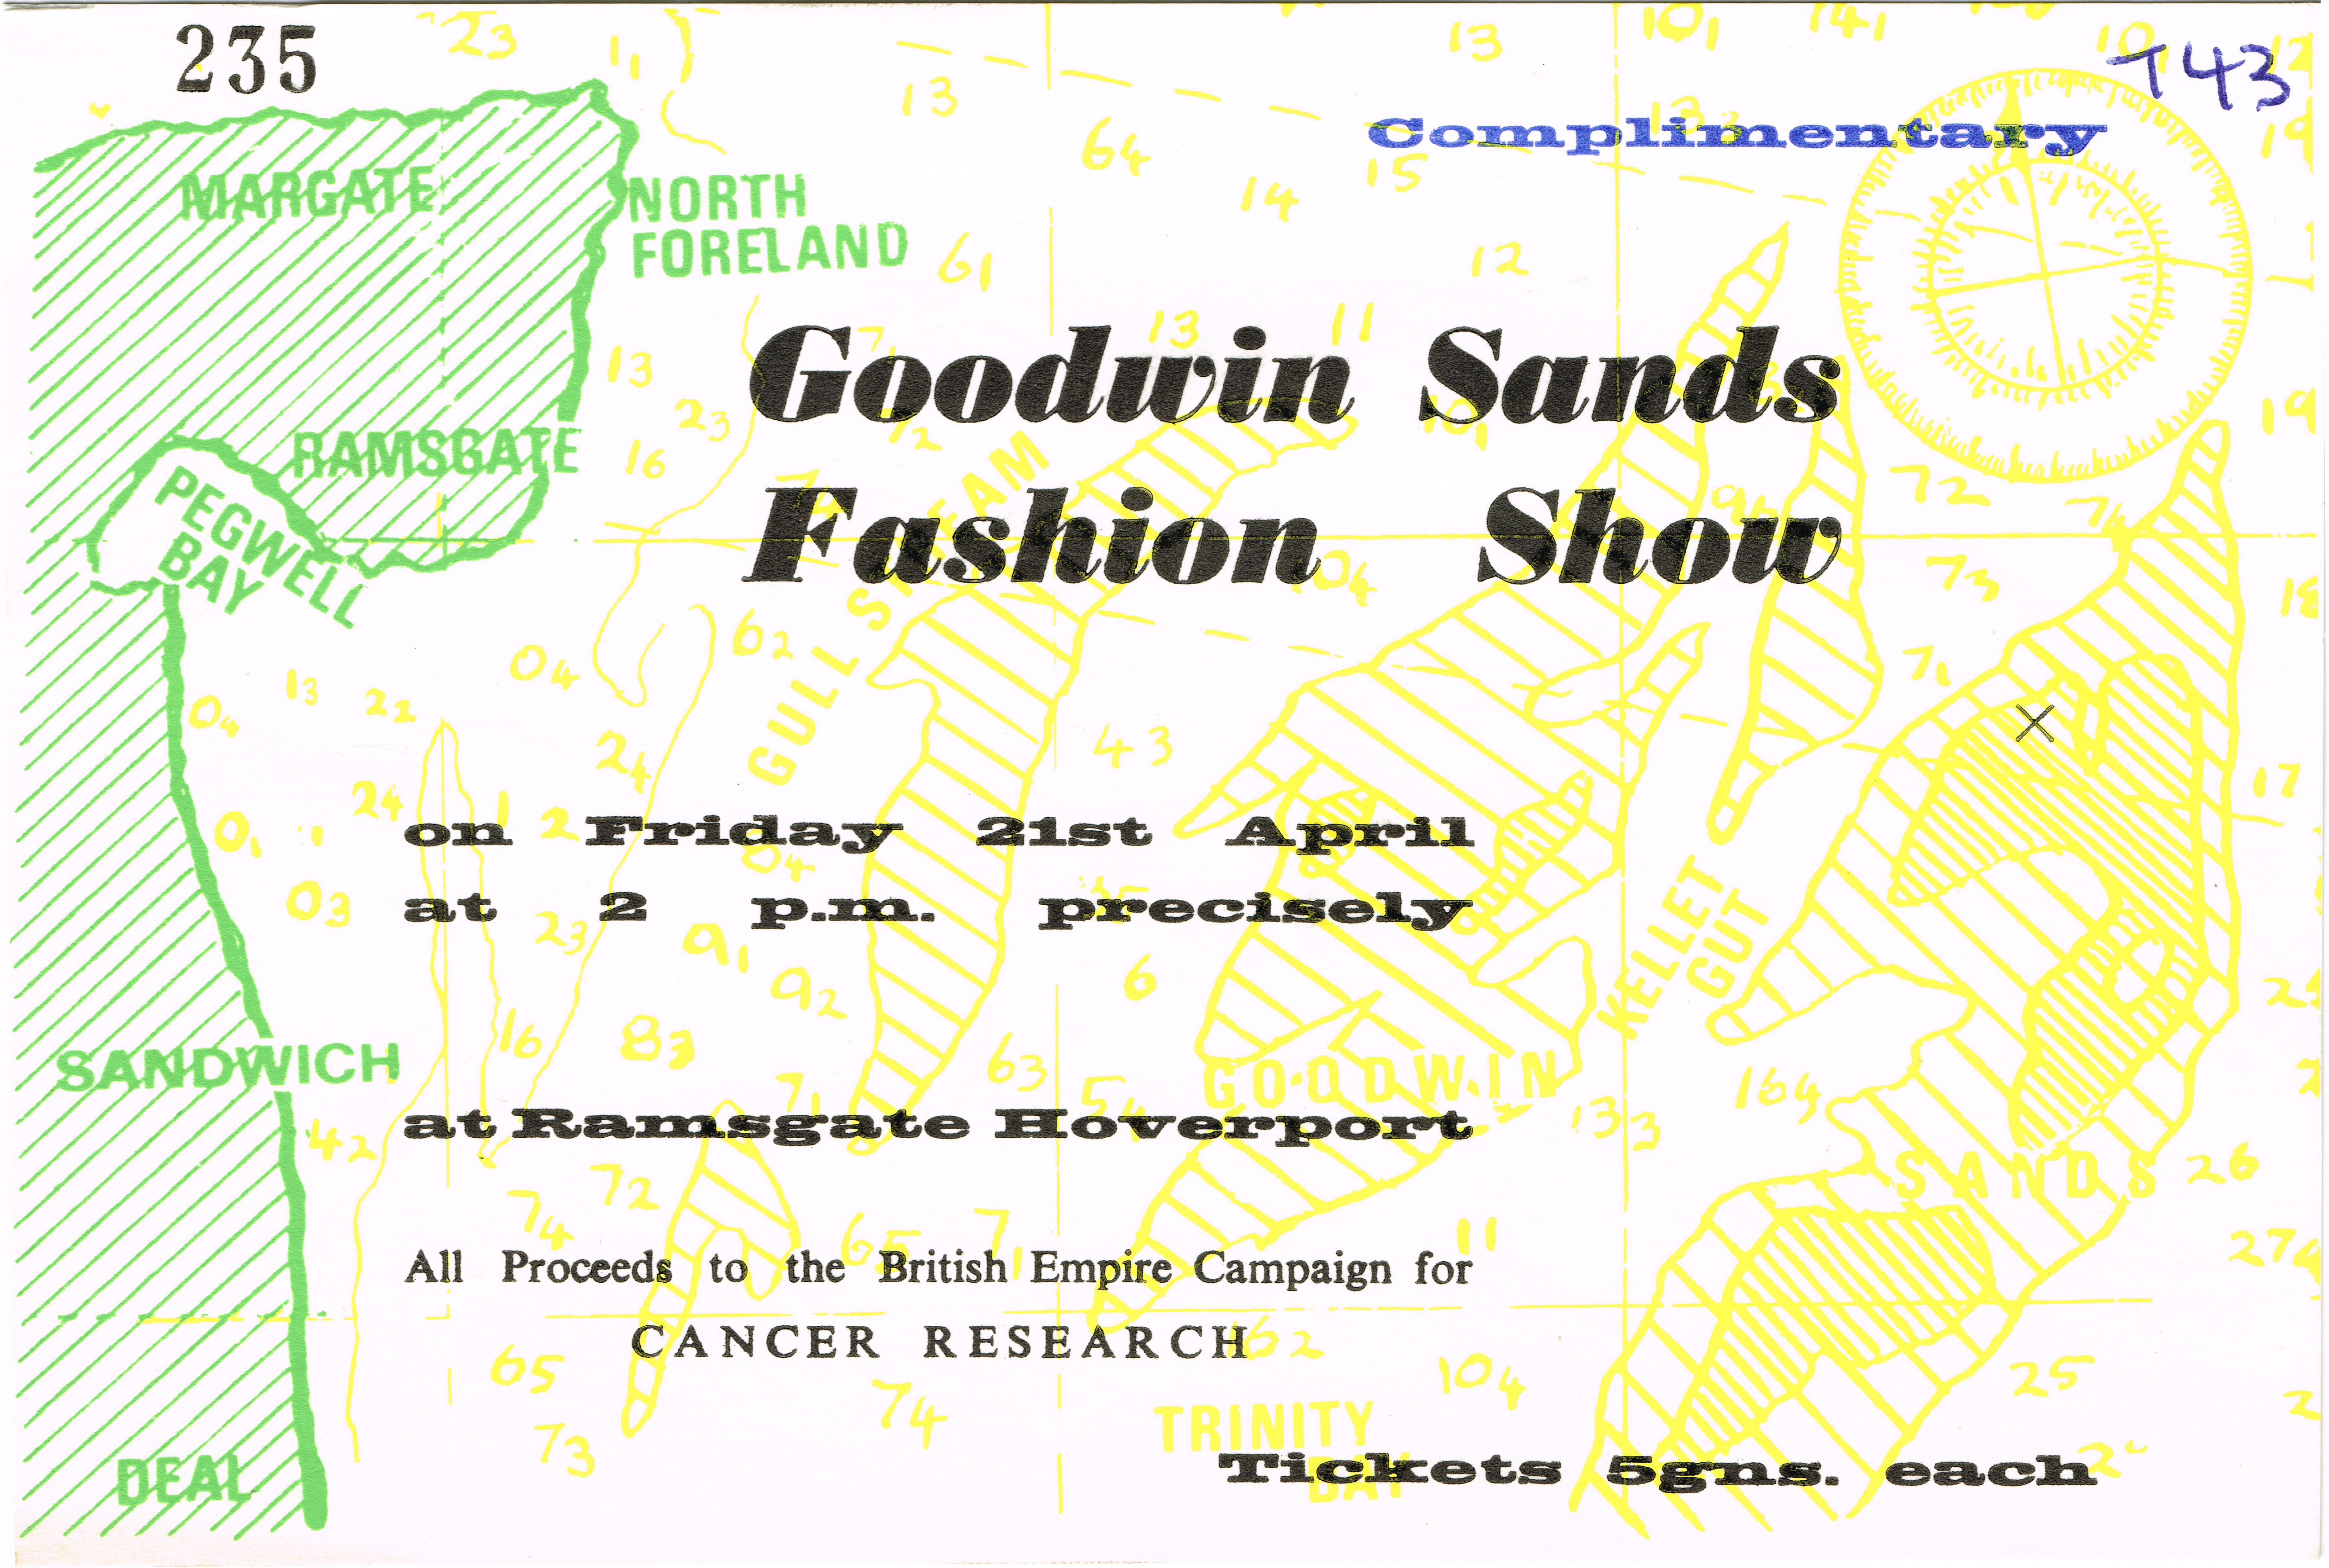 Advert for Goodwin Sands Fashion Show, printed by the Martell Press